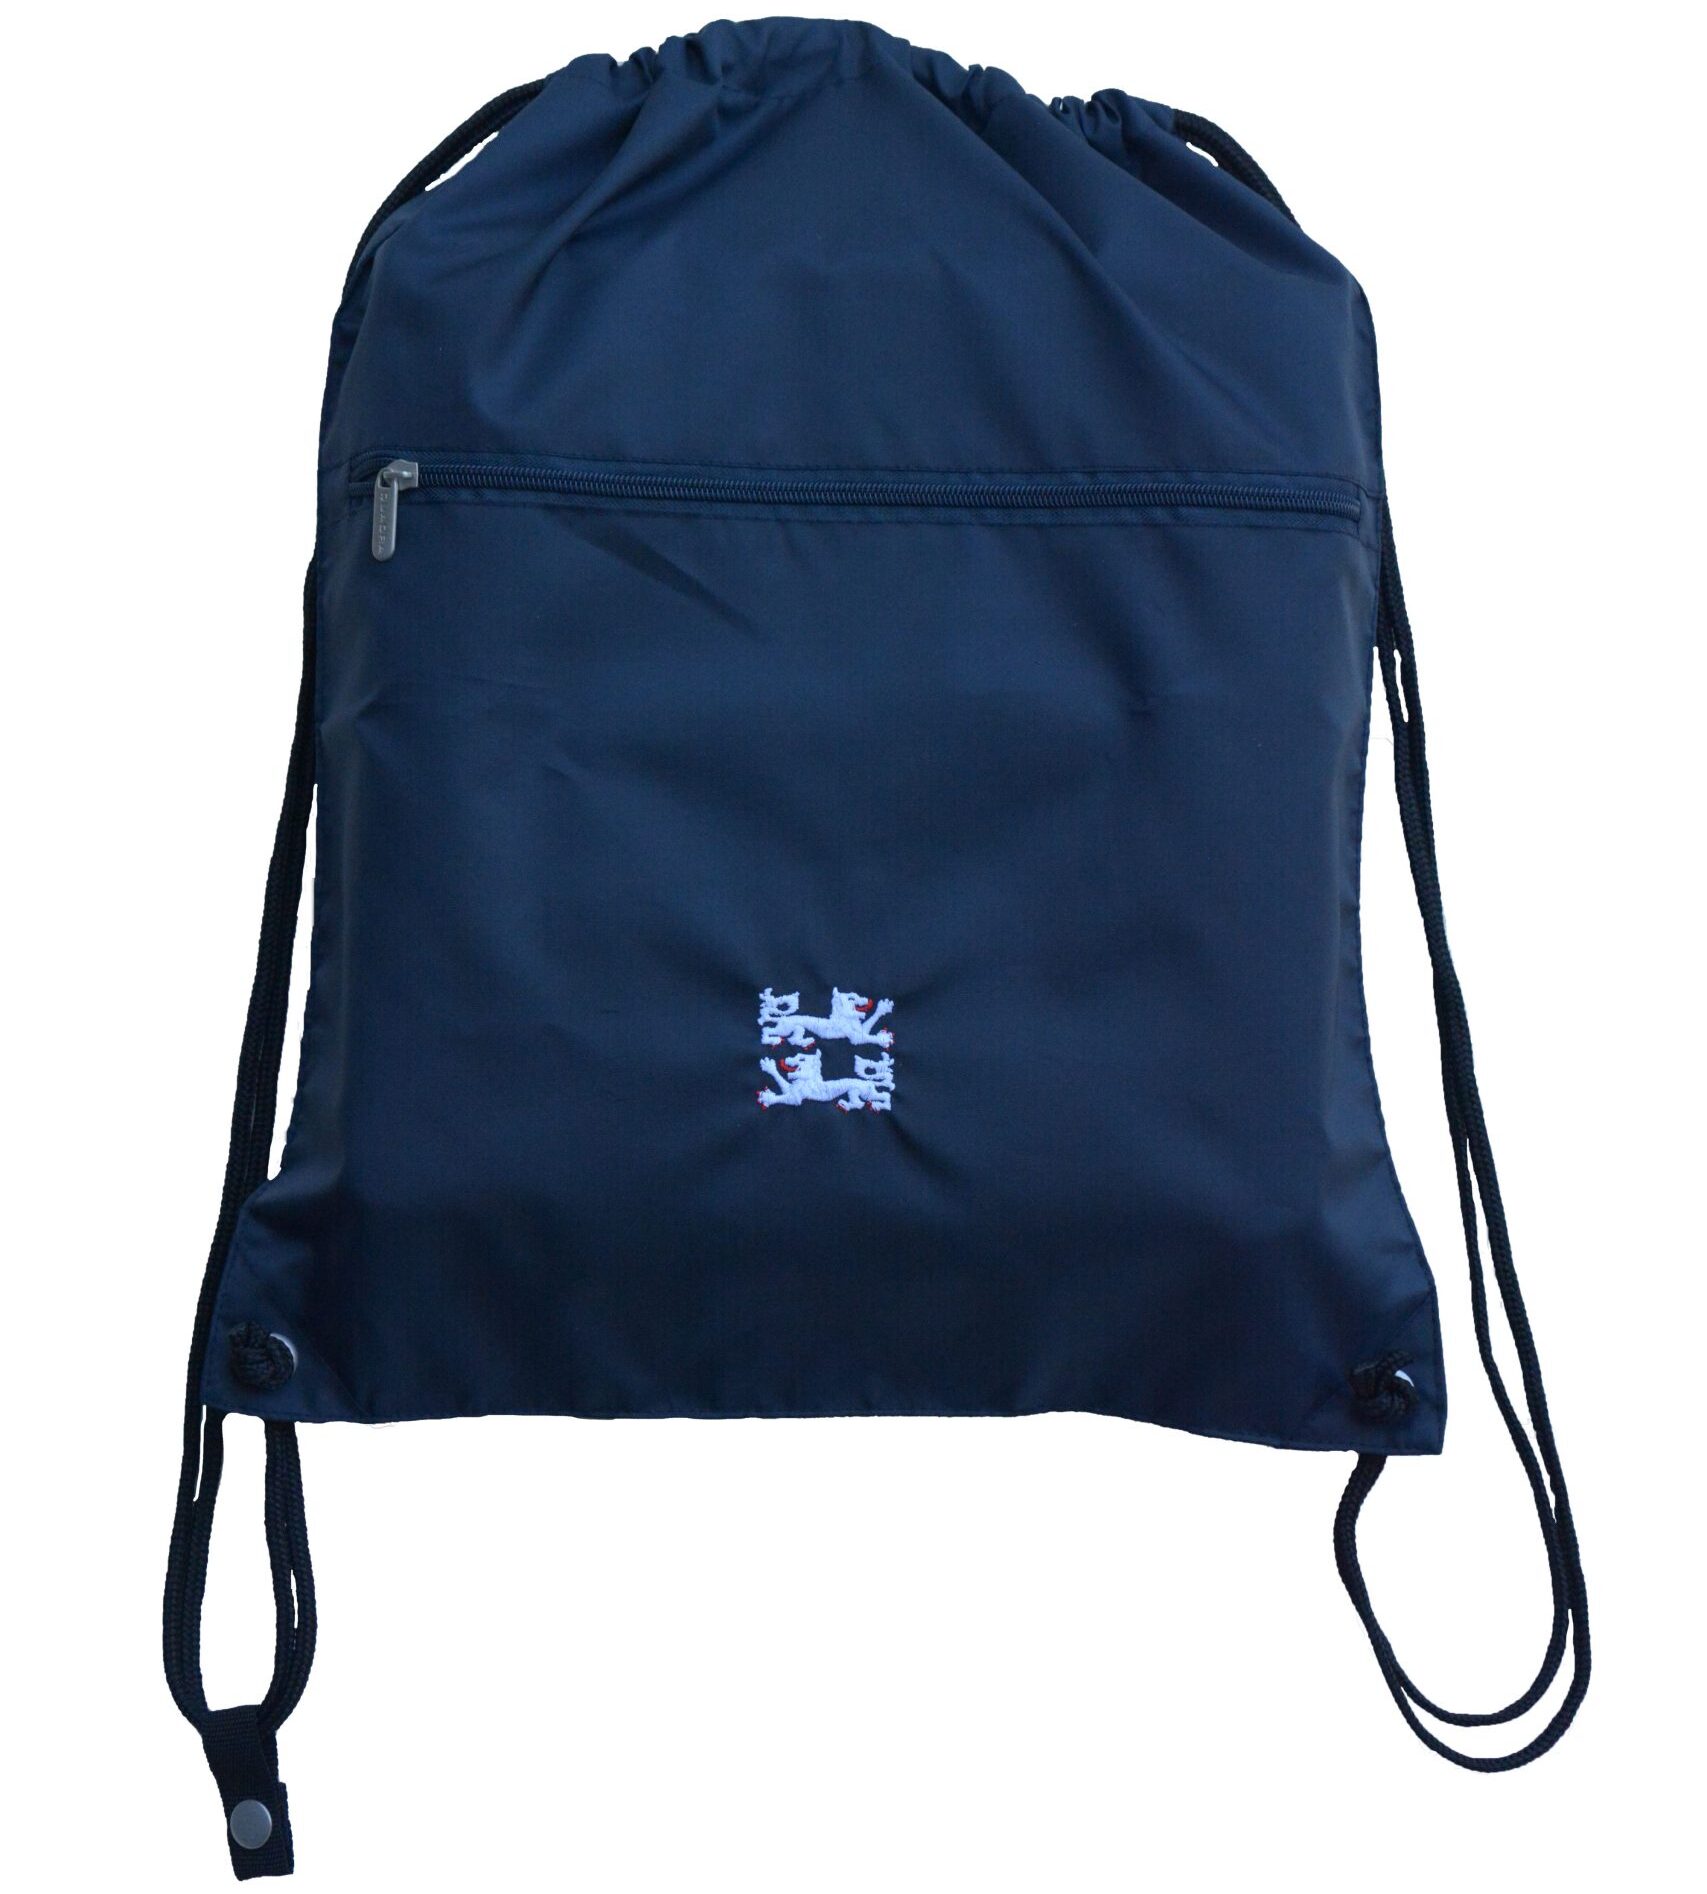 Navy Pump Bag With Embroidered School Logo